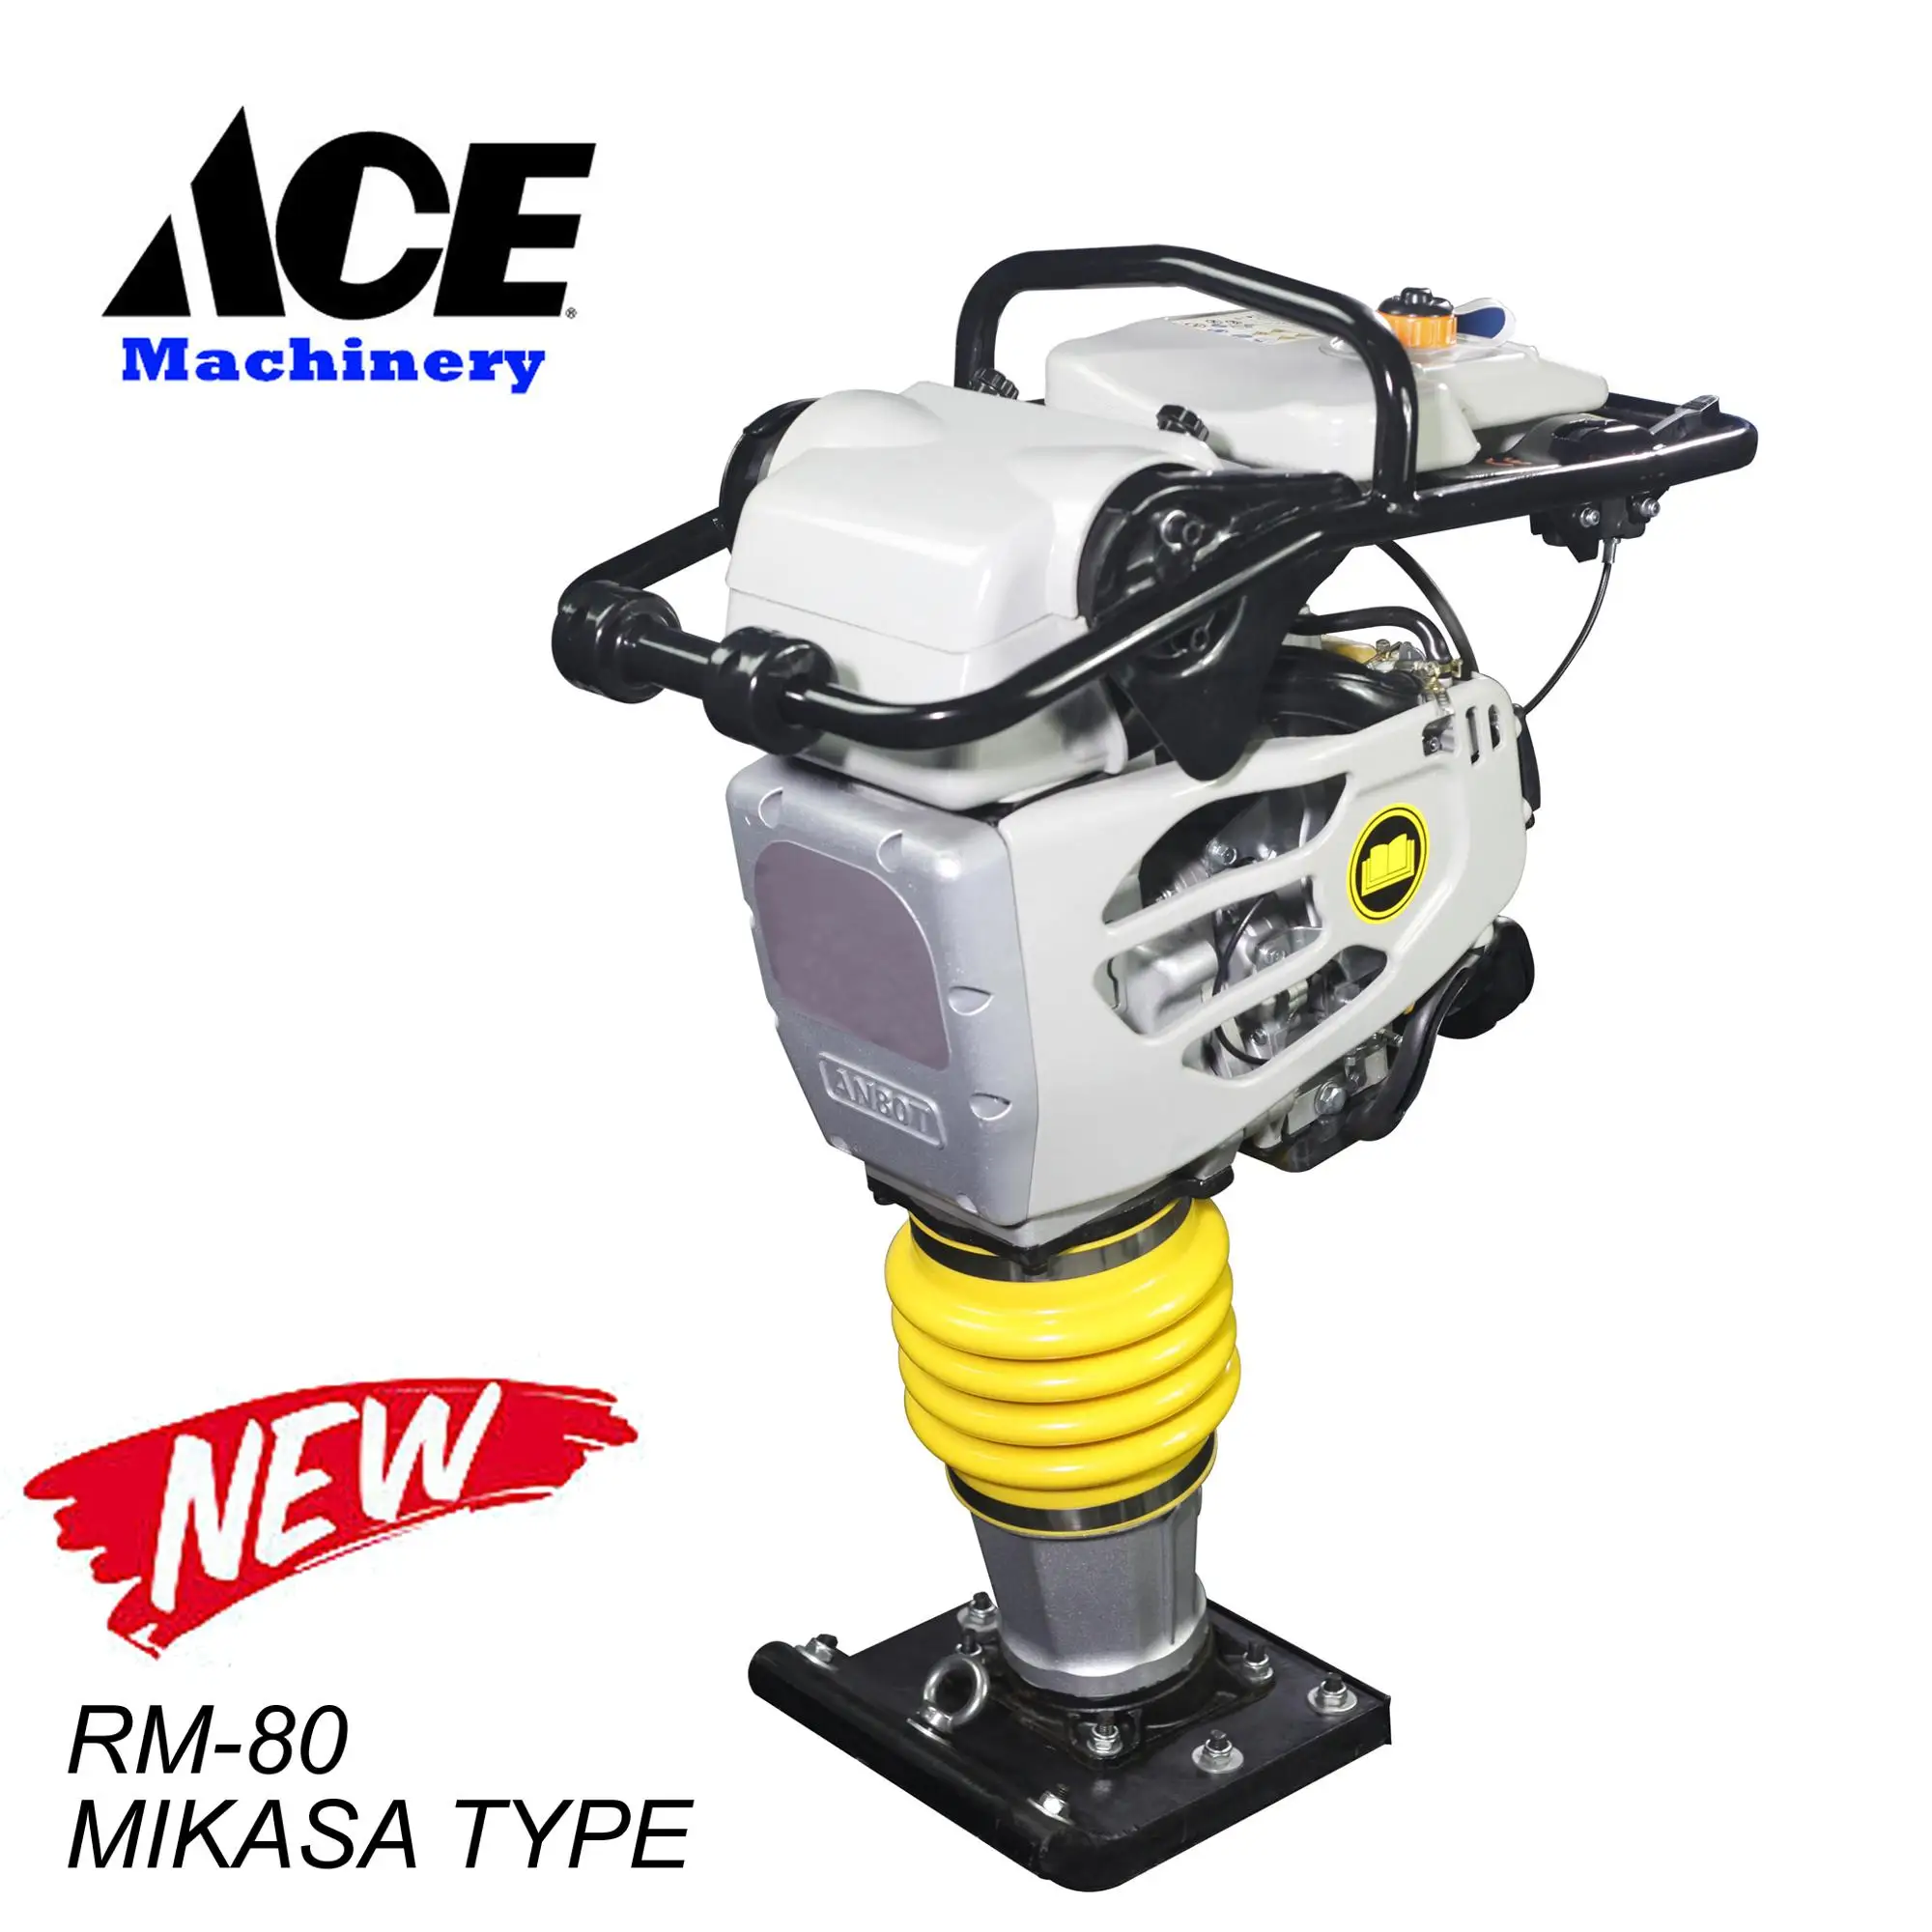 Factory Price Construction Vibratory Tamping Rammer with Honda Engine